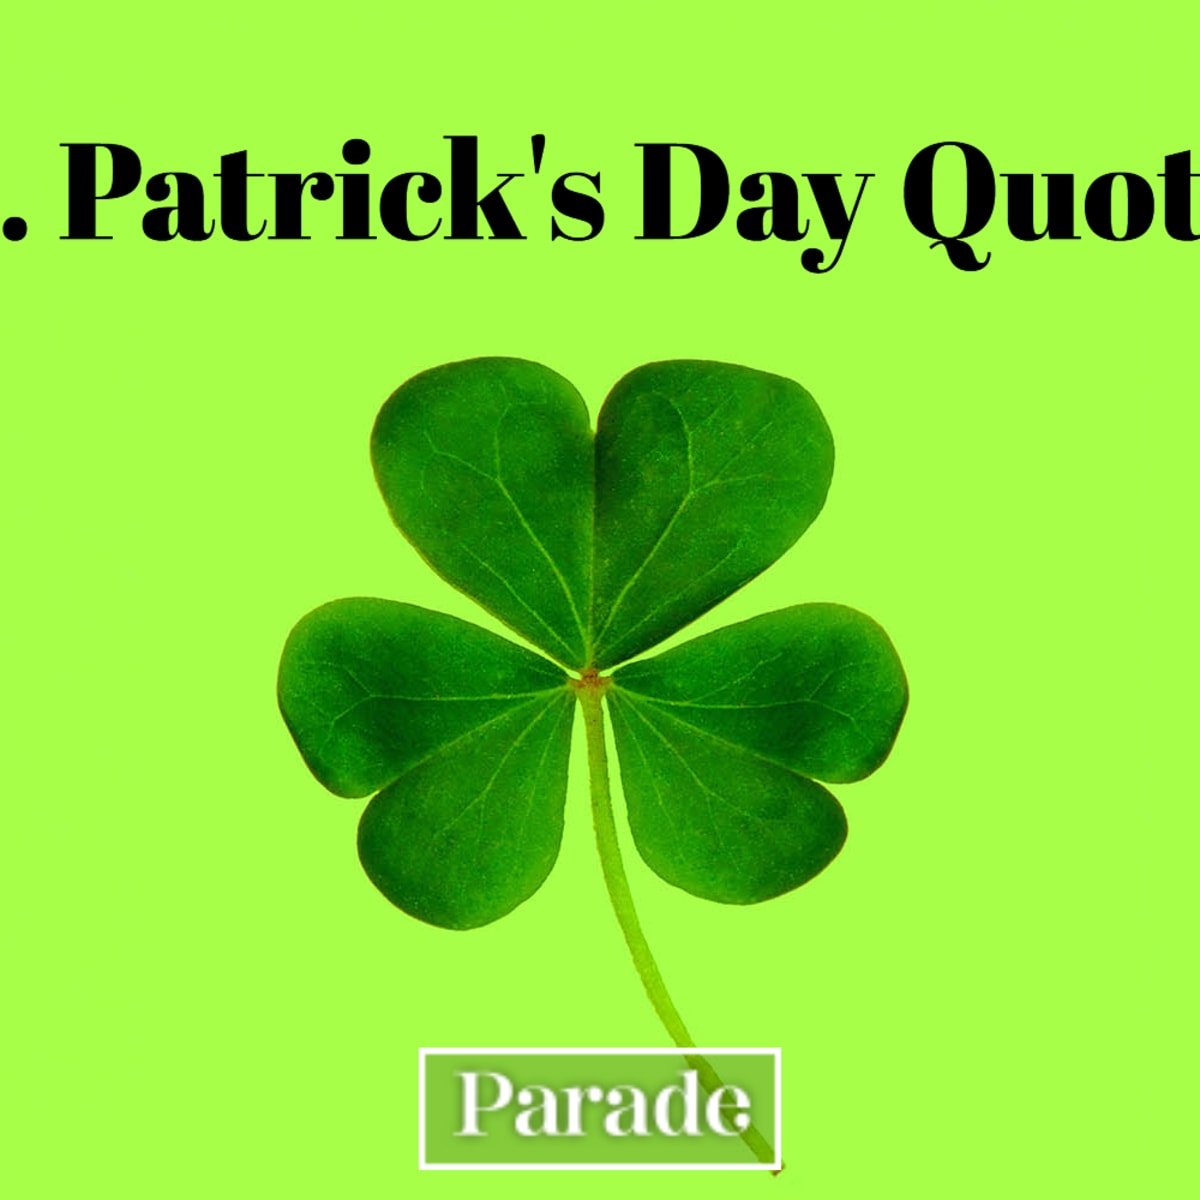 St. Patrick's Day Quotes to Channel the Luck of the Irish: Entertainment, Recipes, Health, Life, Holidays